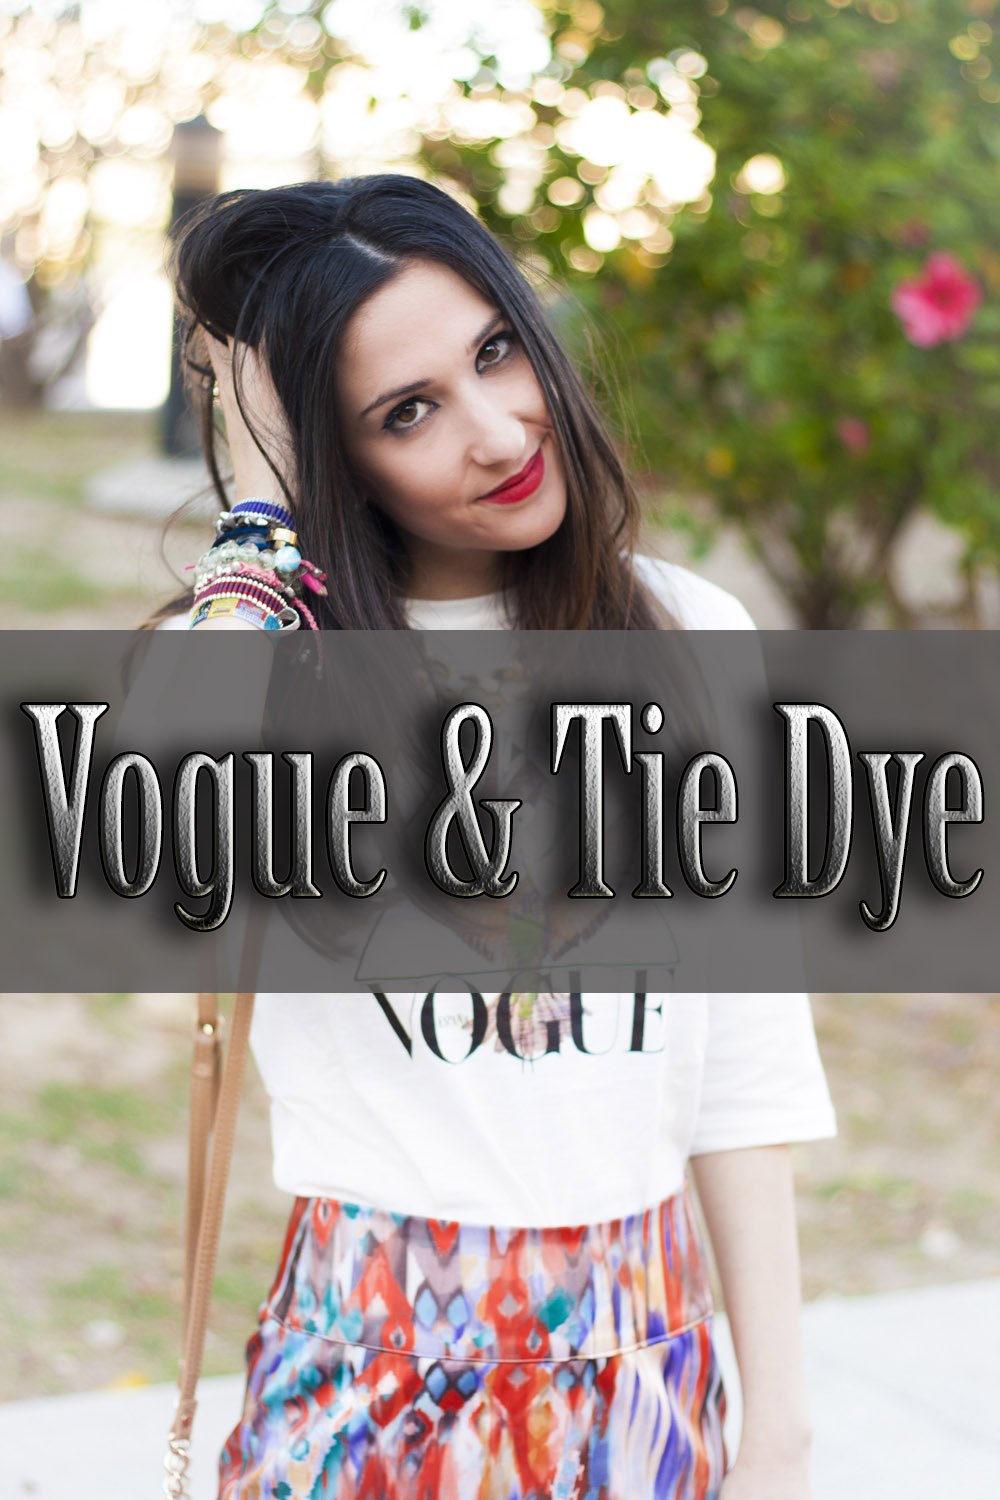 Vogue and Tie dye